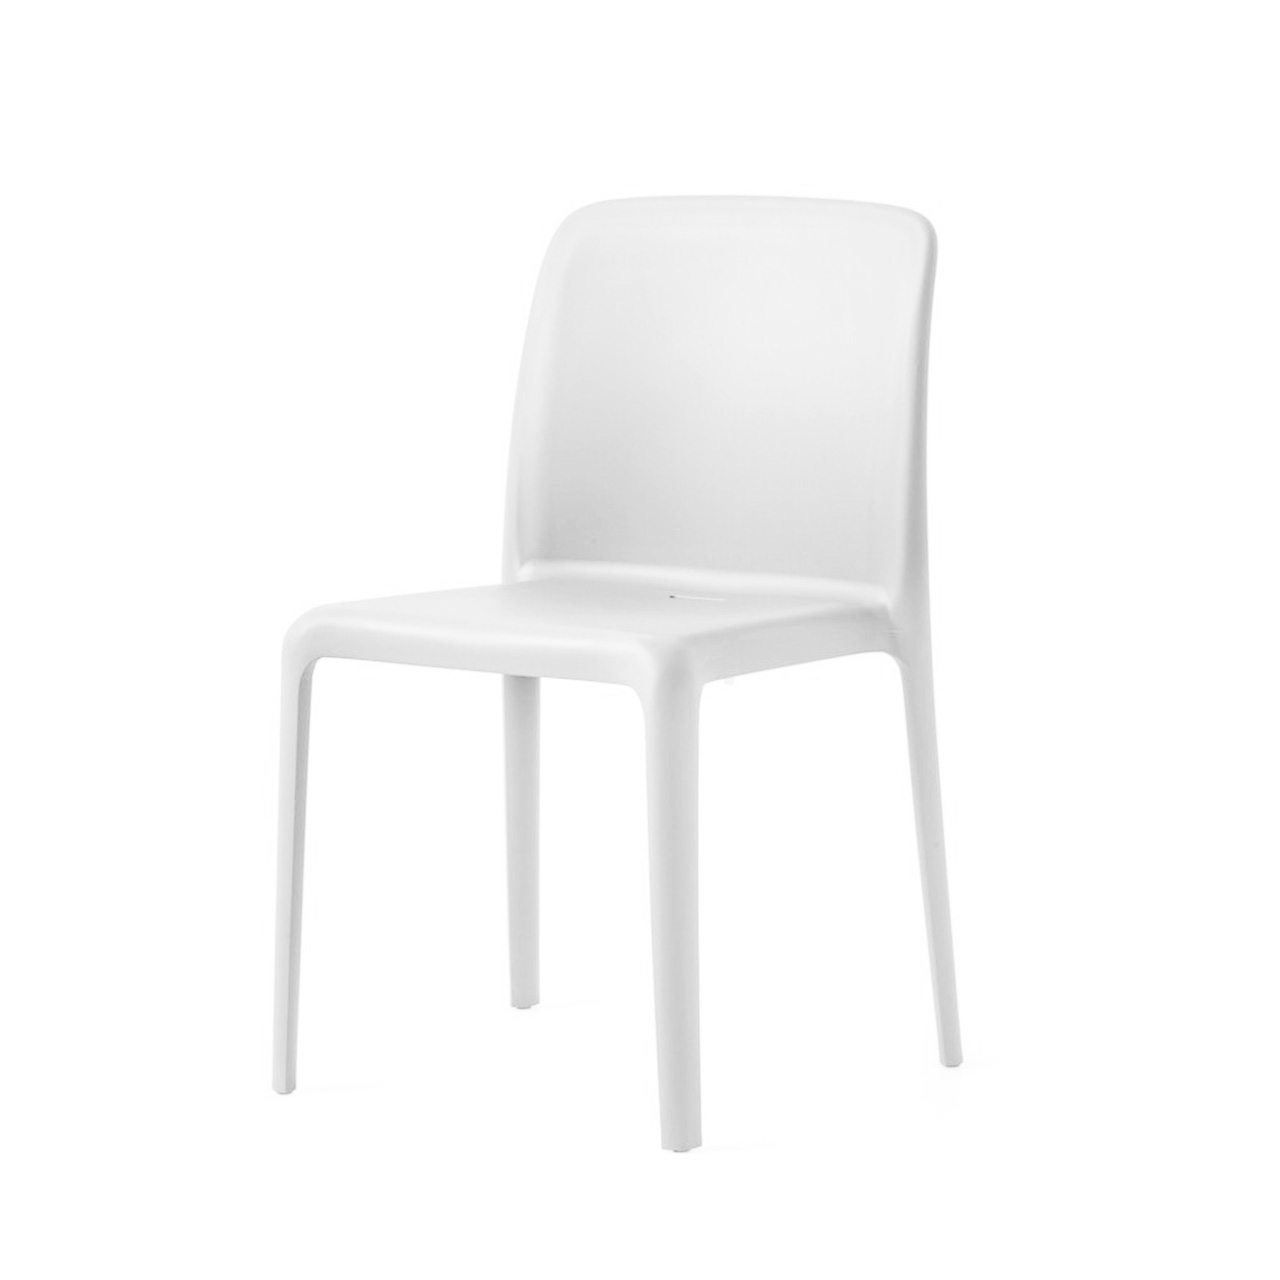 CONNUBIA BY CALLIGARISBAYO CHAIR 바요 체어 (화이트)MADE IN ITALY